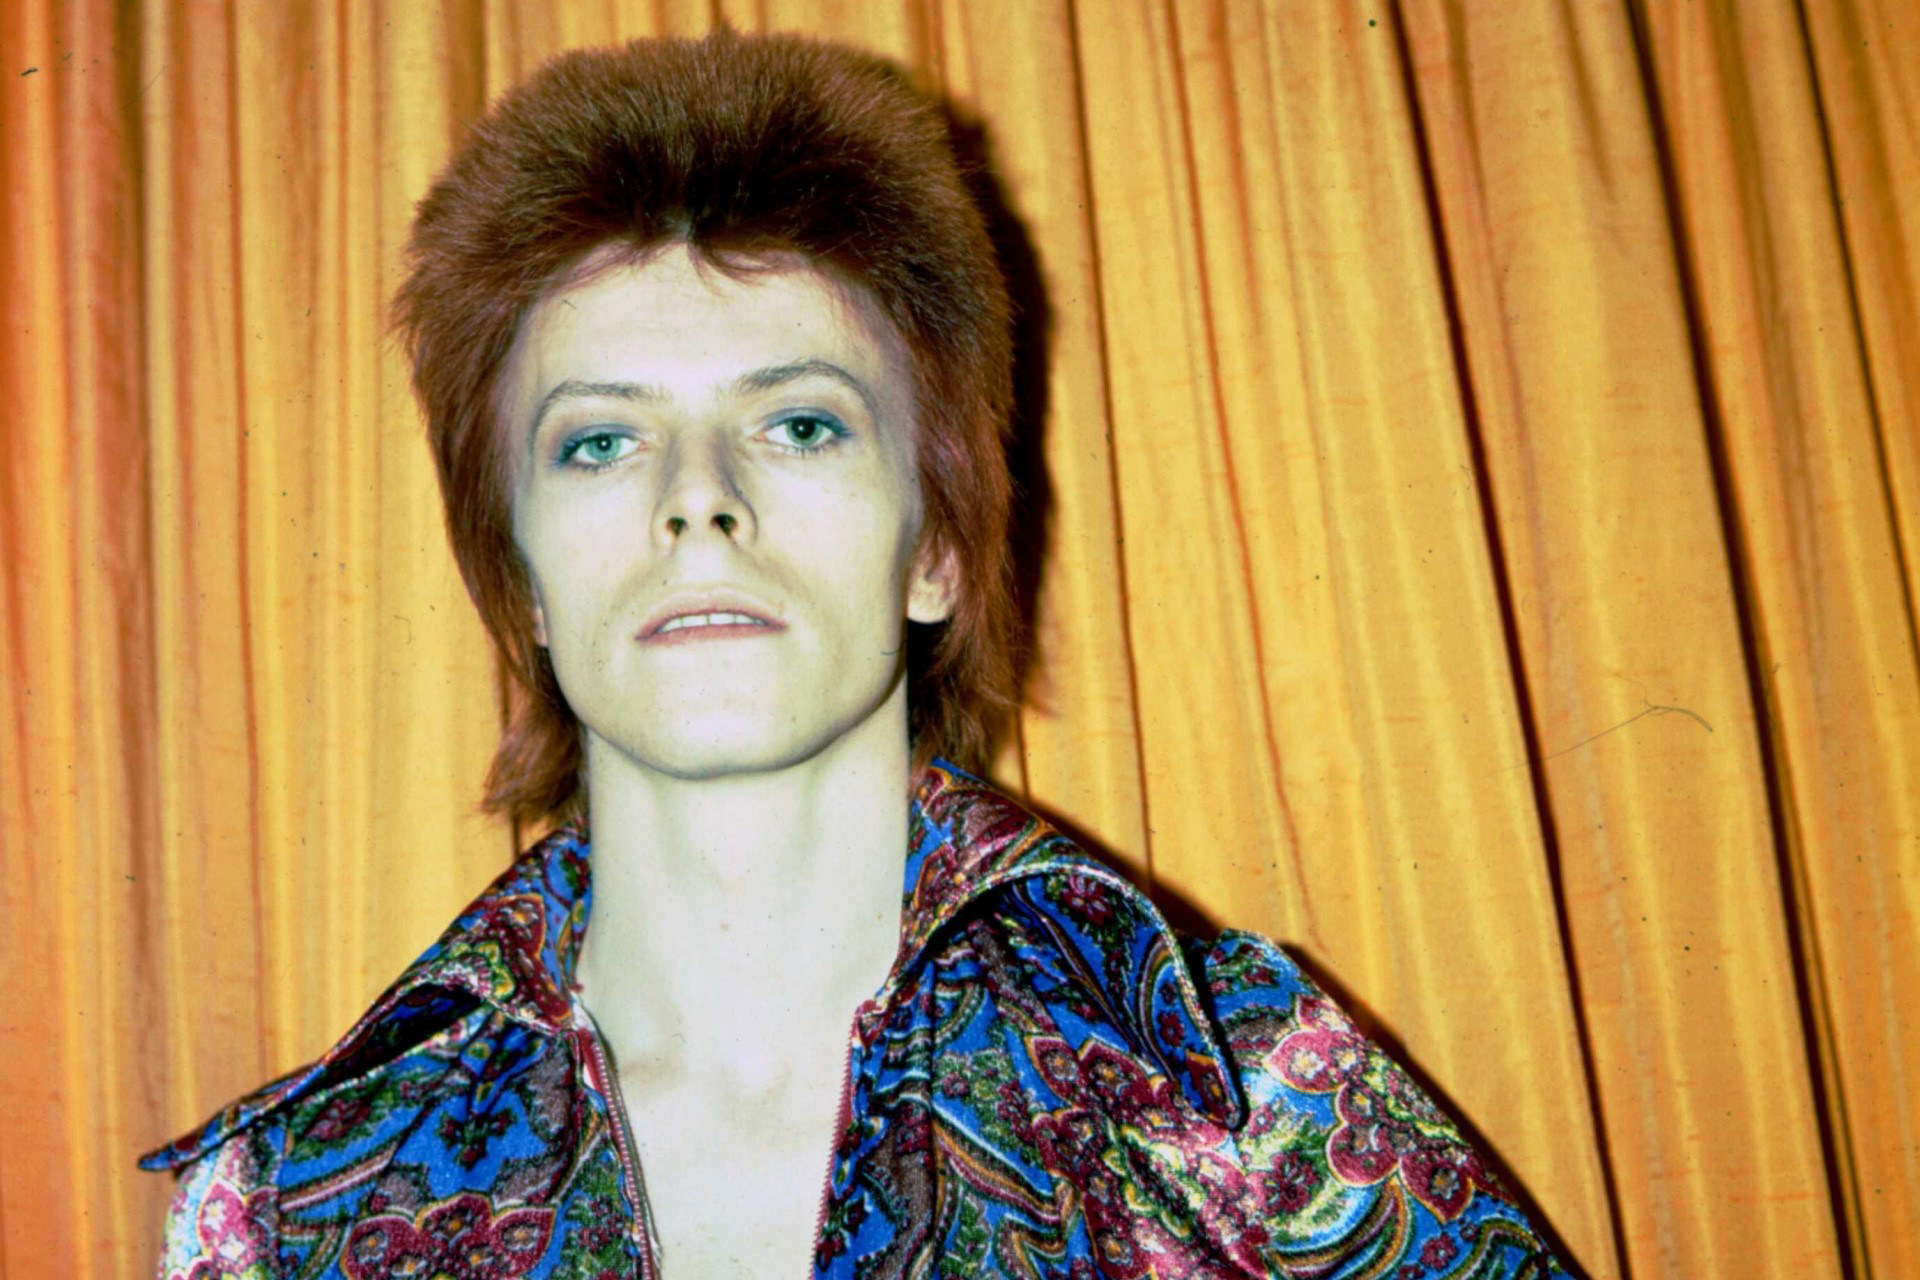 How David Bowie's sublime characters shaped pop culture